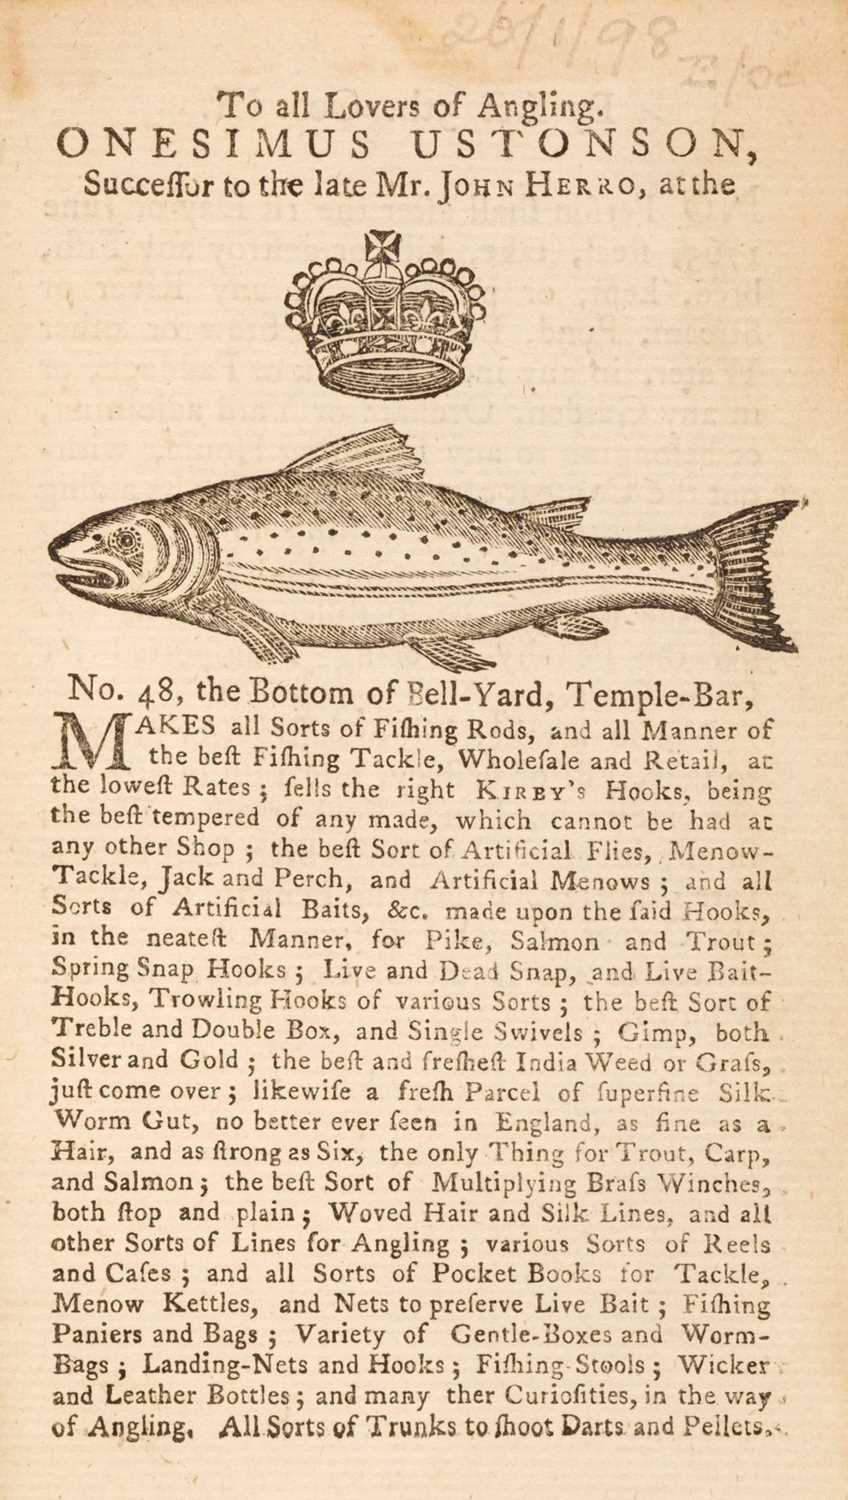 Lot 89 - Smith, John. The True Art of Angling... , 12th edition, 1770